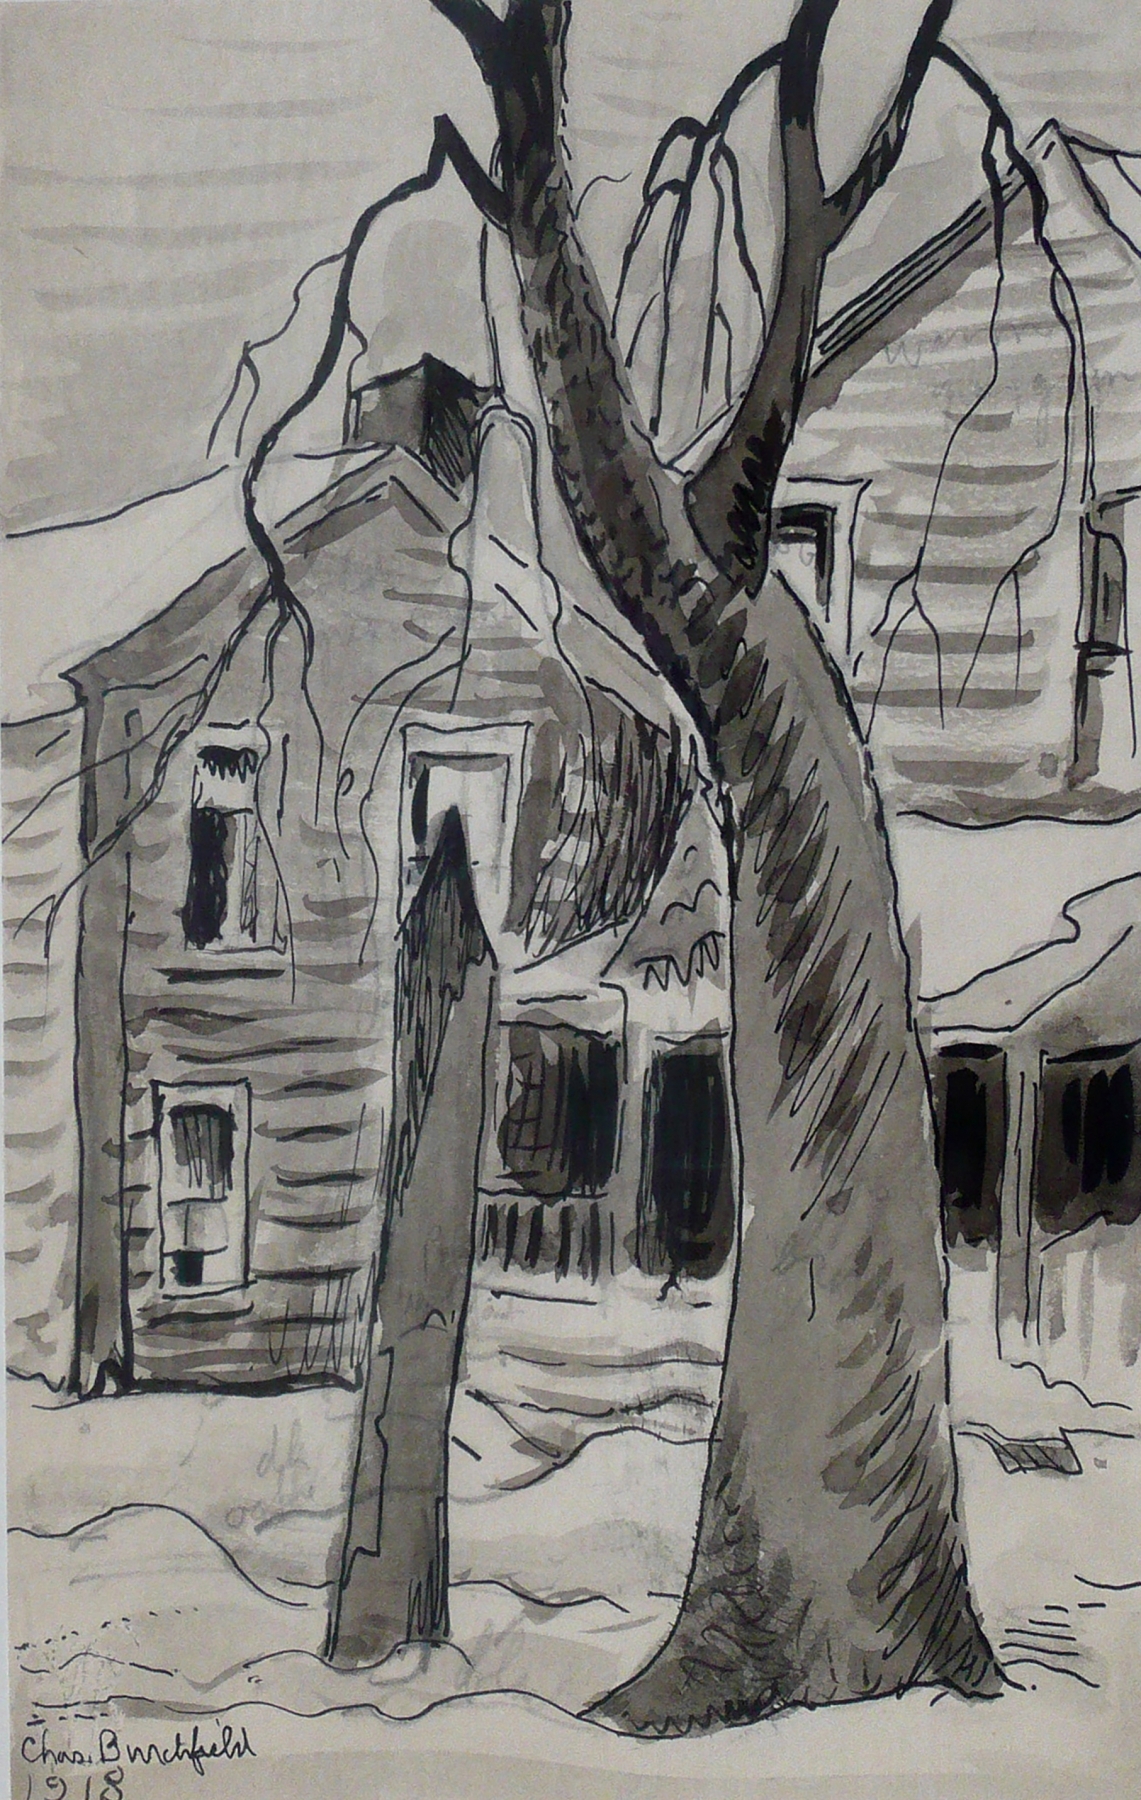 Two Houses in Winter, 1918

Ink and graphite on paper

8 3/8 x 5 1/4 inches